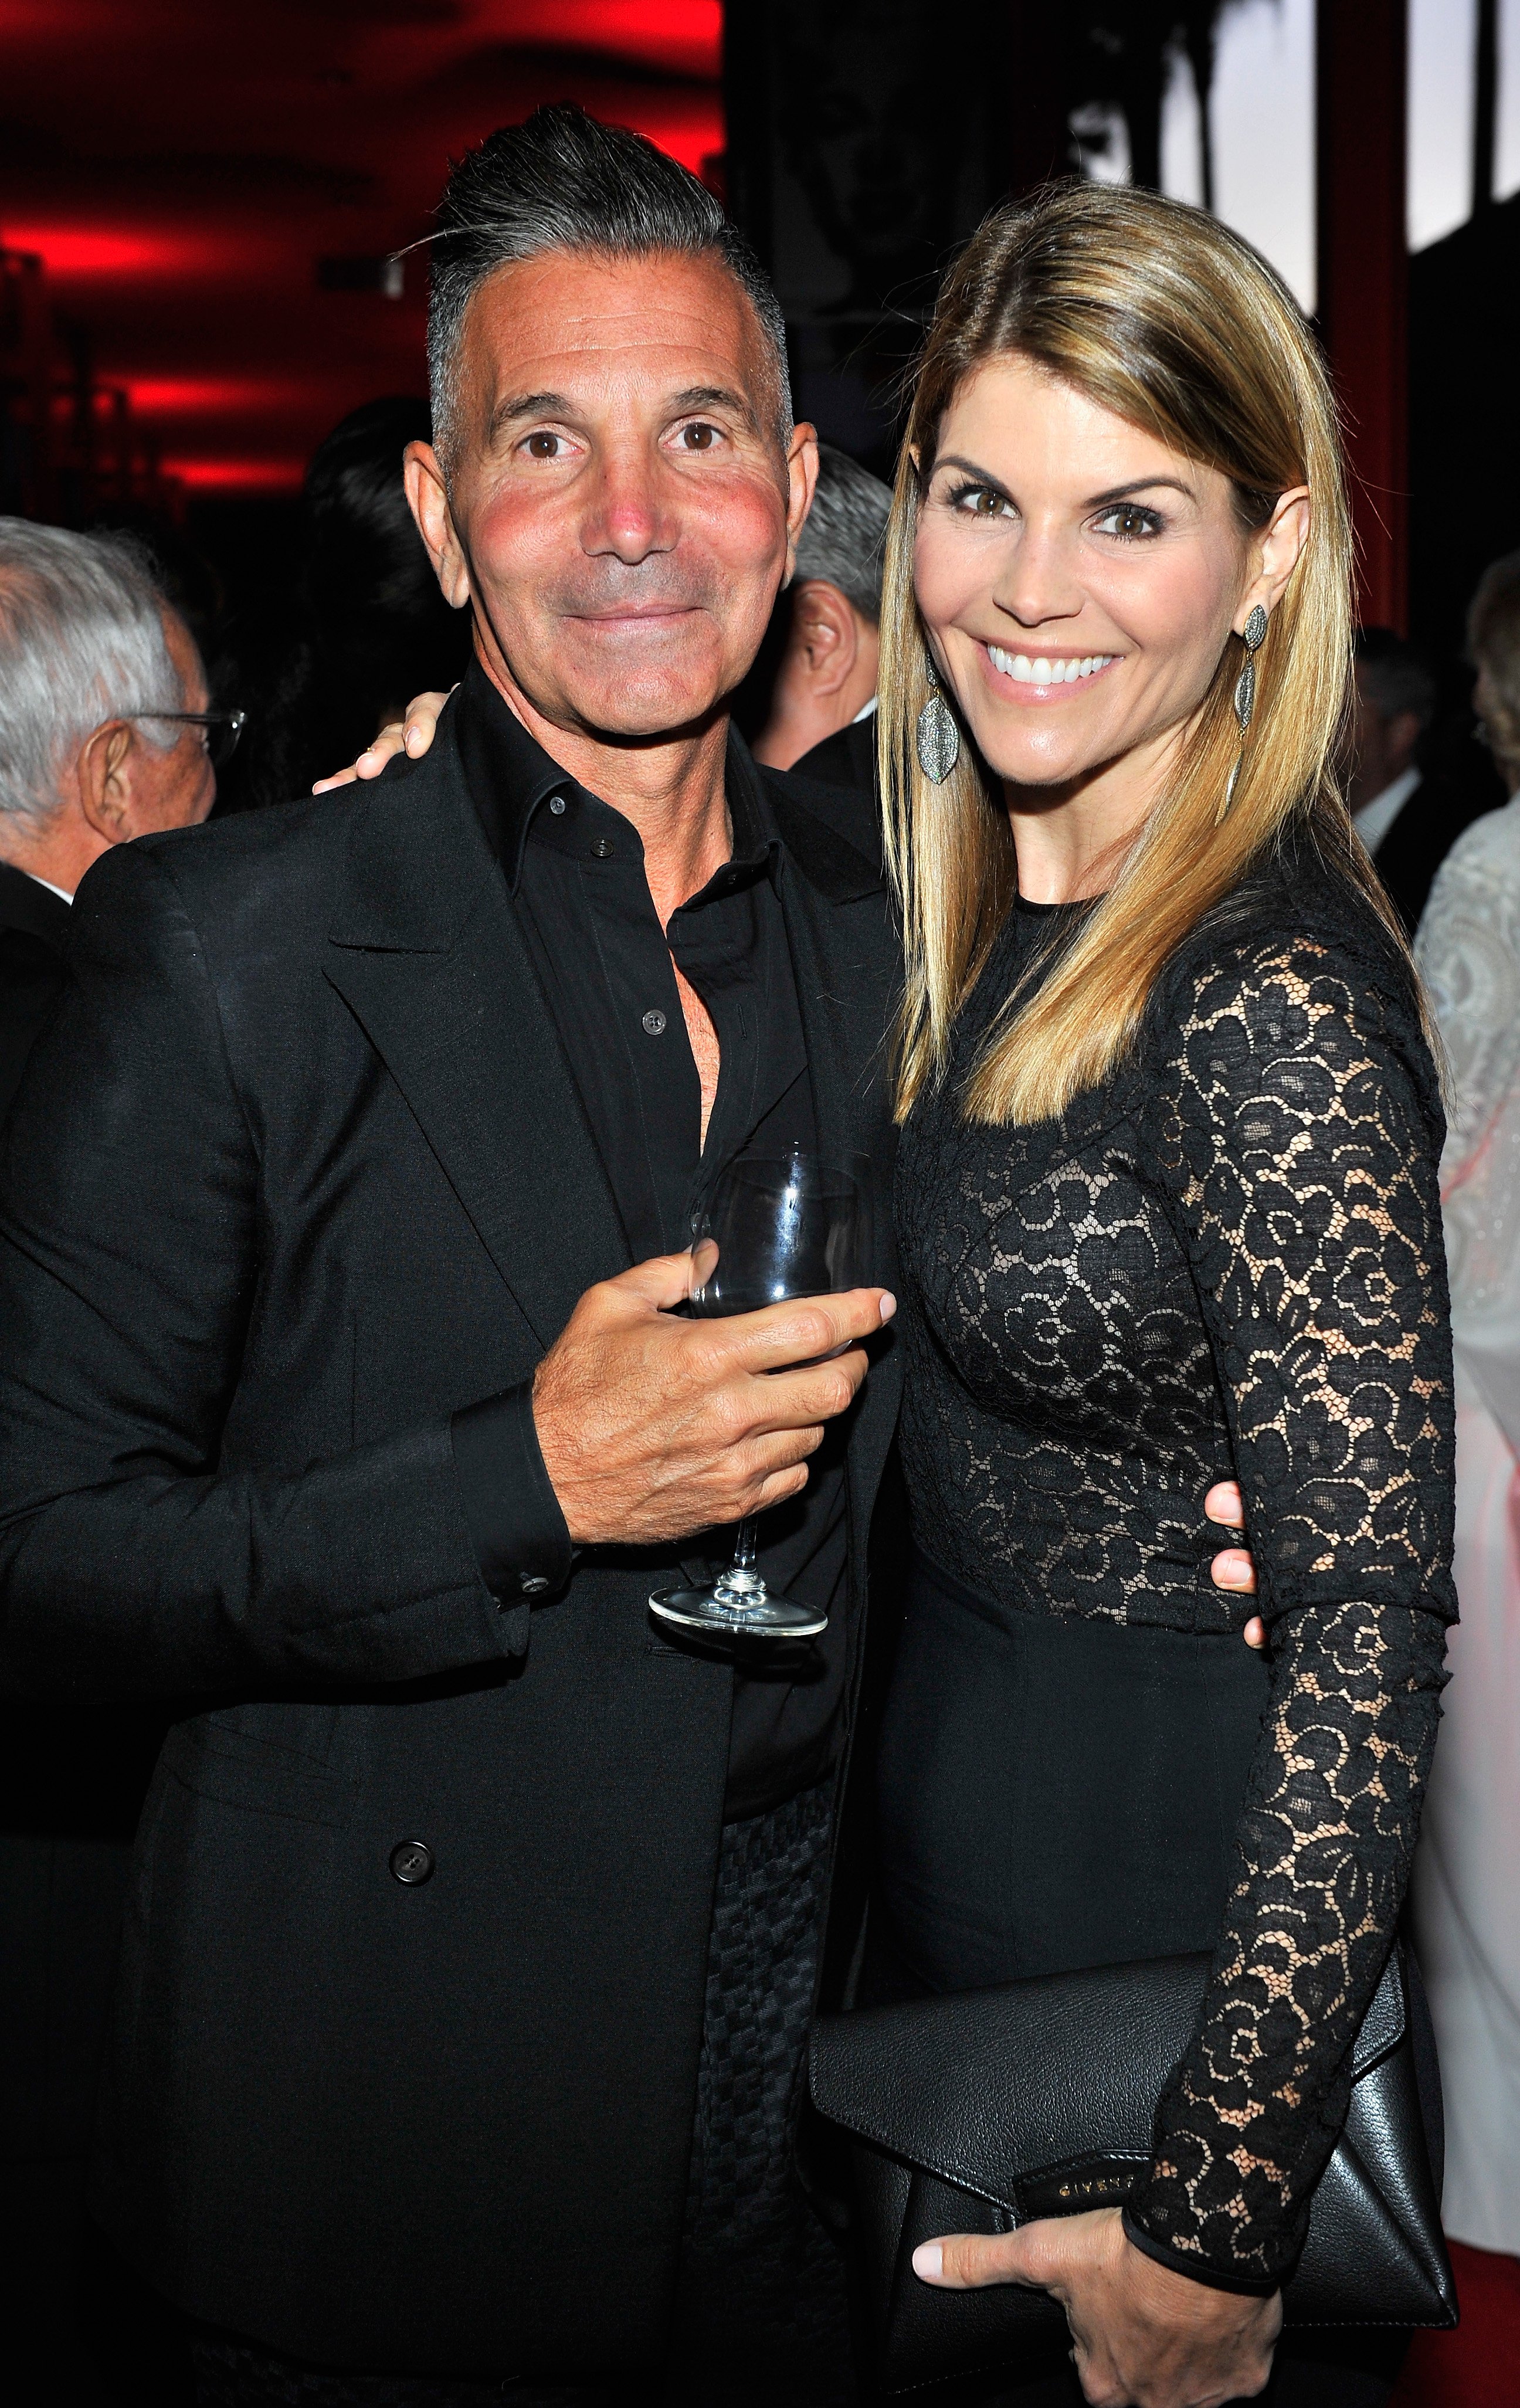 Lori Loughlin with her husband Mossimo Giannulli at the LACMA's 50th Anniversary Gala | Source: Getty Images